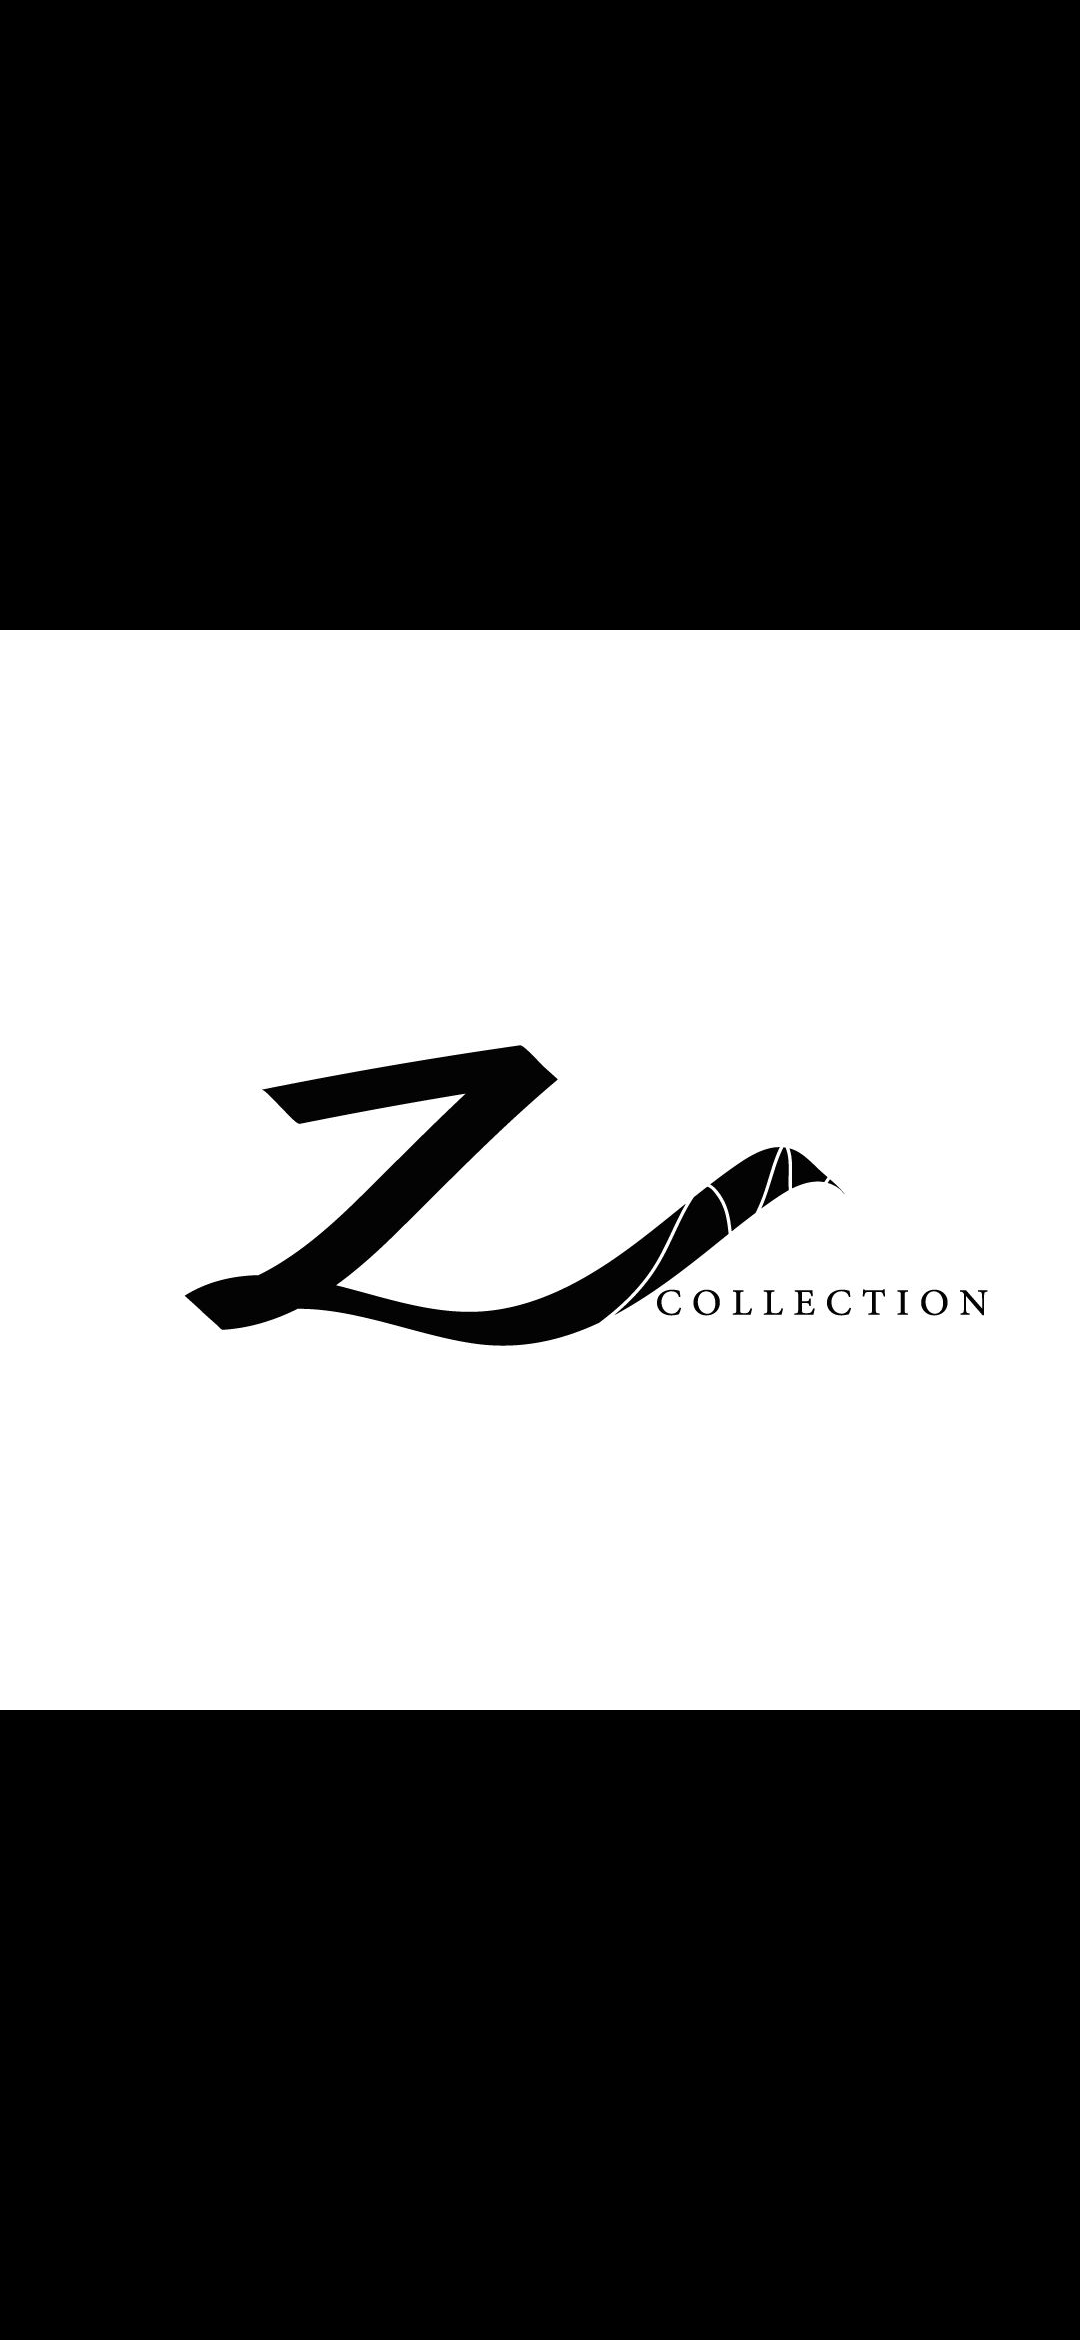 Z collection